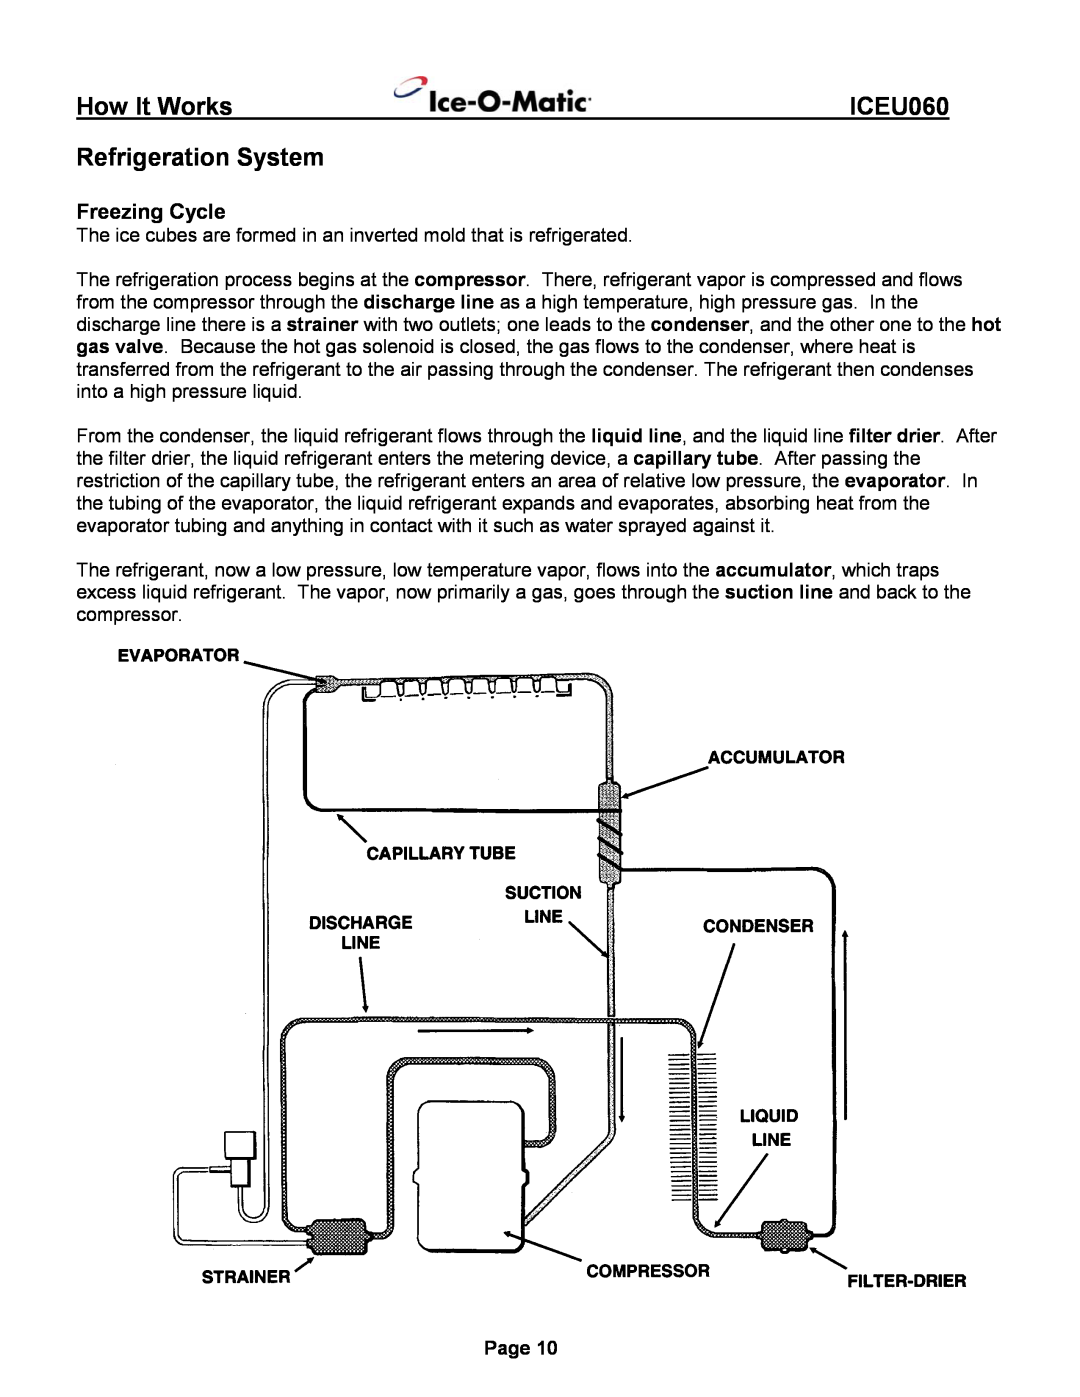 Ice-O-Matic ICEU060 installation manual Refrigeration System, How It Works, Page 